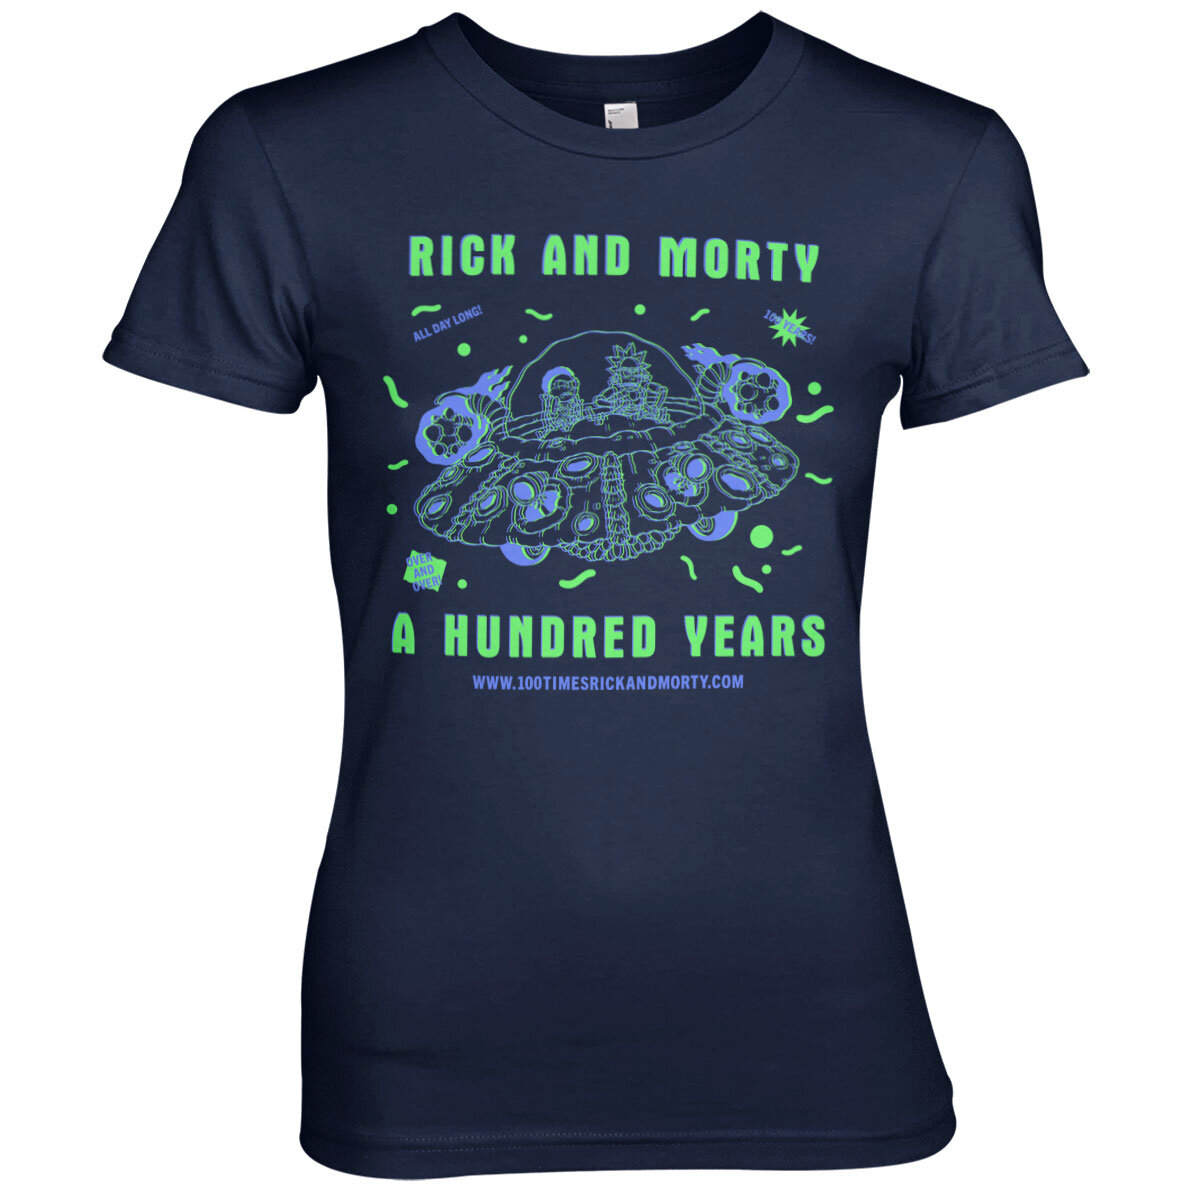 Rick And Morty - A Hundred Years Girly Tee